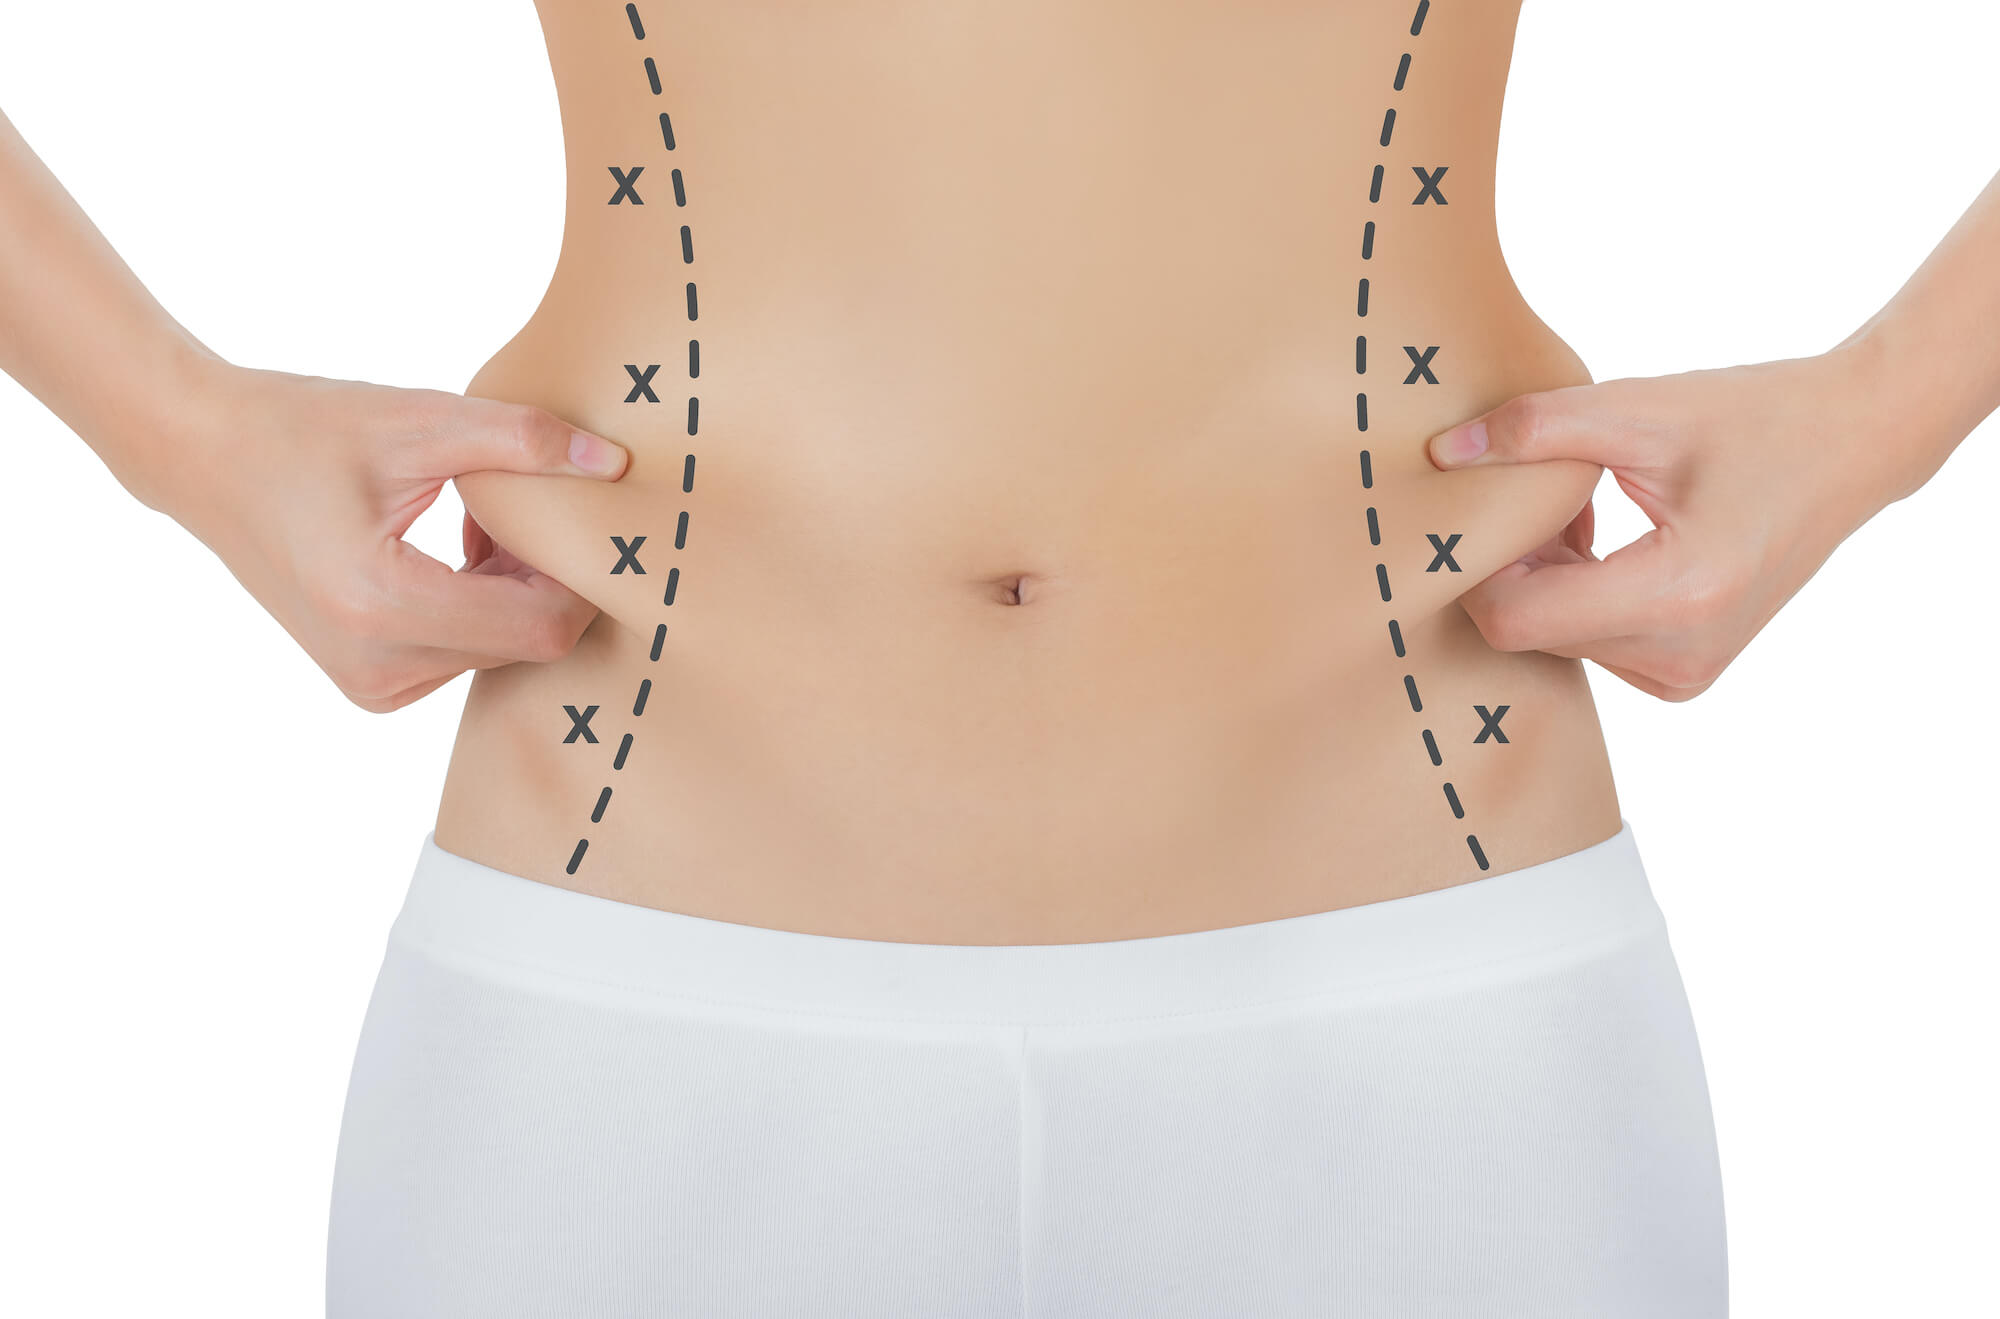 Woman's Abdomen With Lines Drawn for Liposuction Surgery Plastic Surgery Before and After | Vincent N. Zubowicz, MD